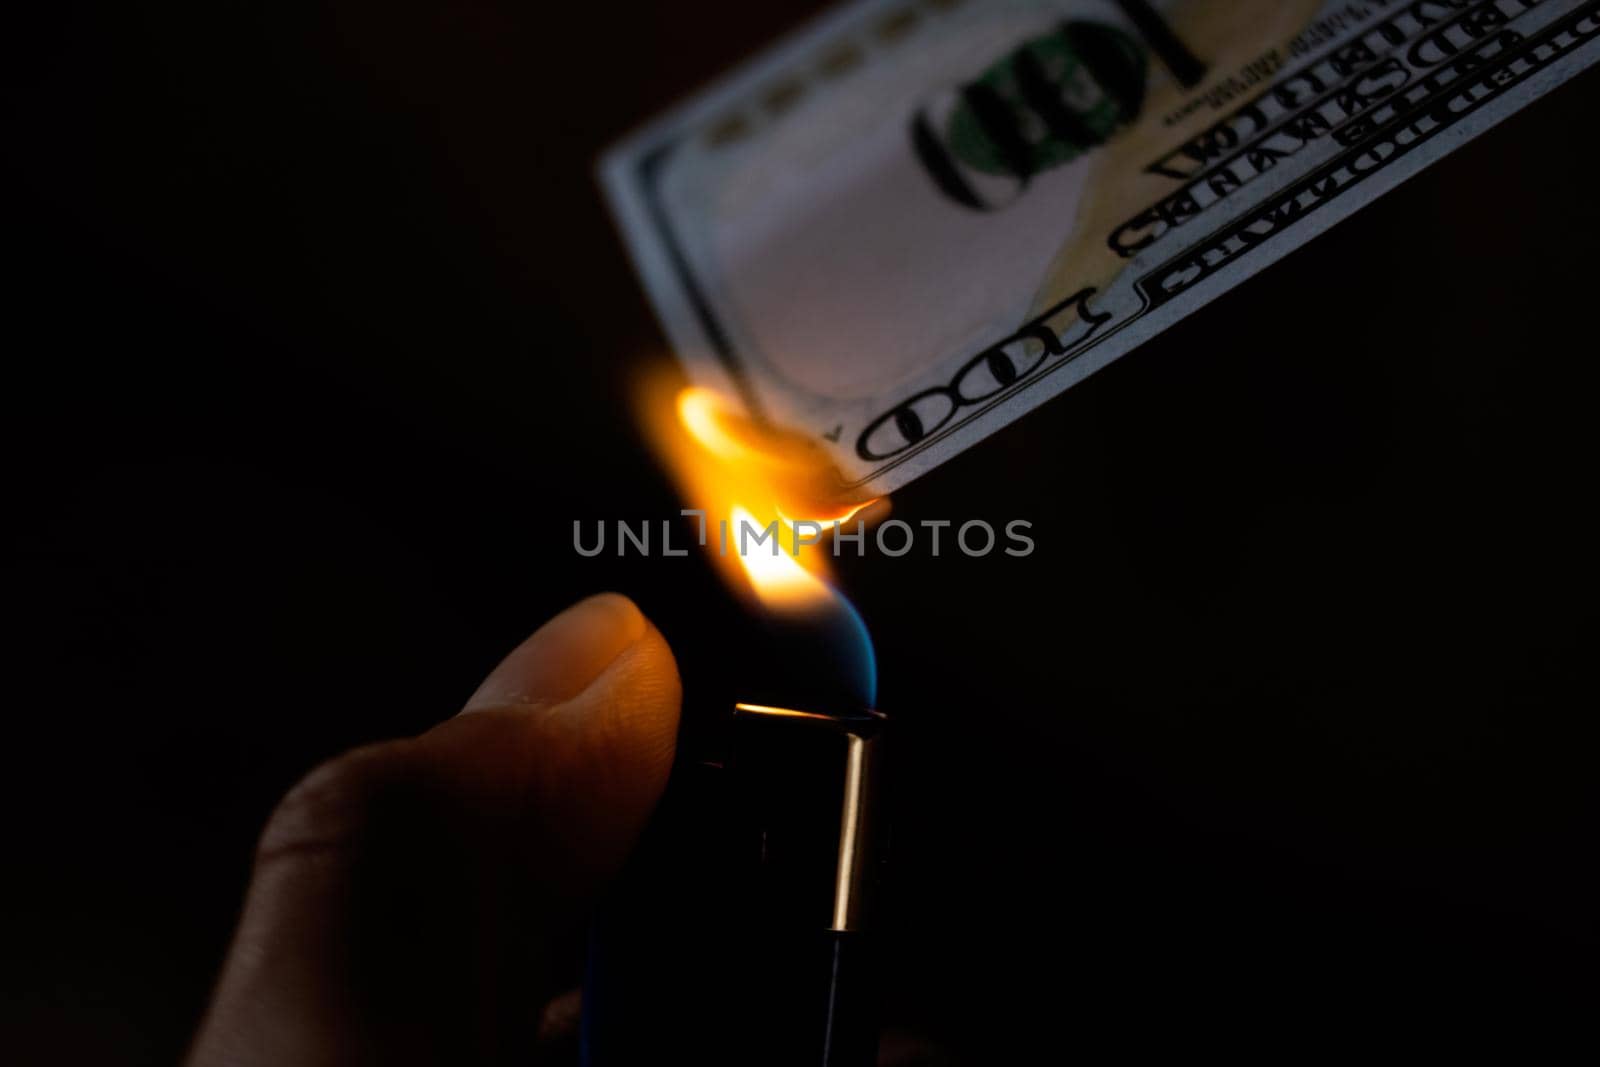 Burning dollar and lighter in hand close up